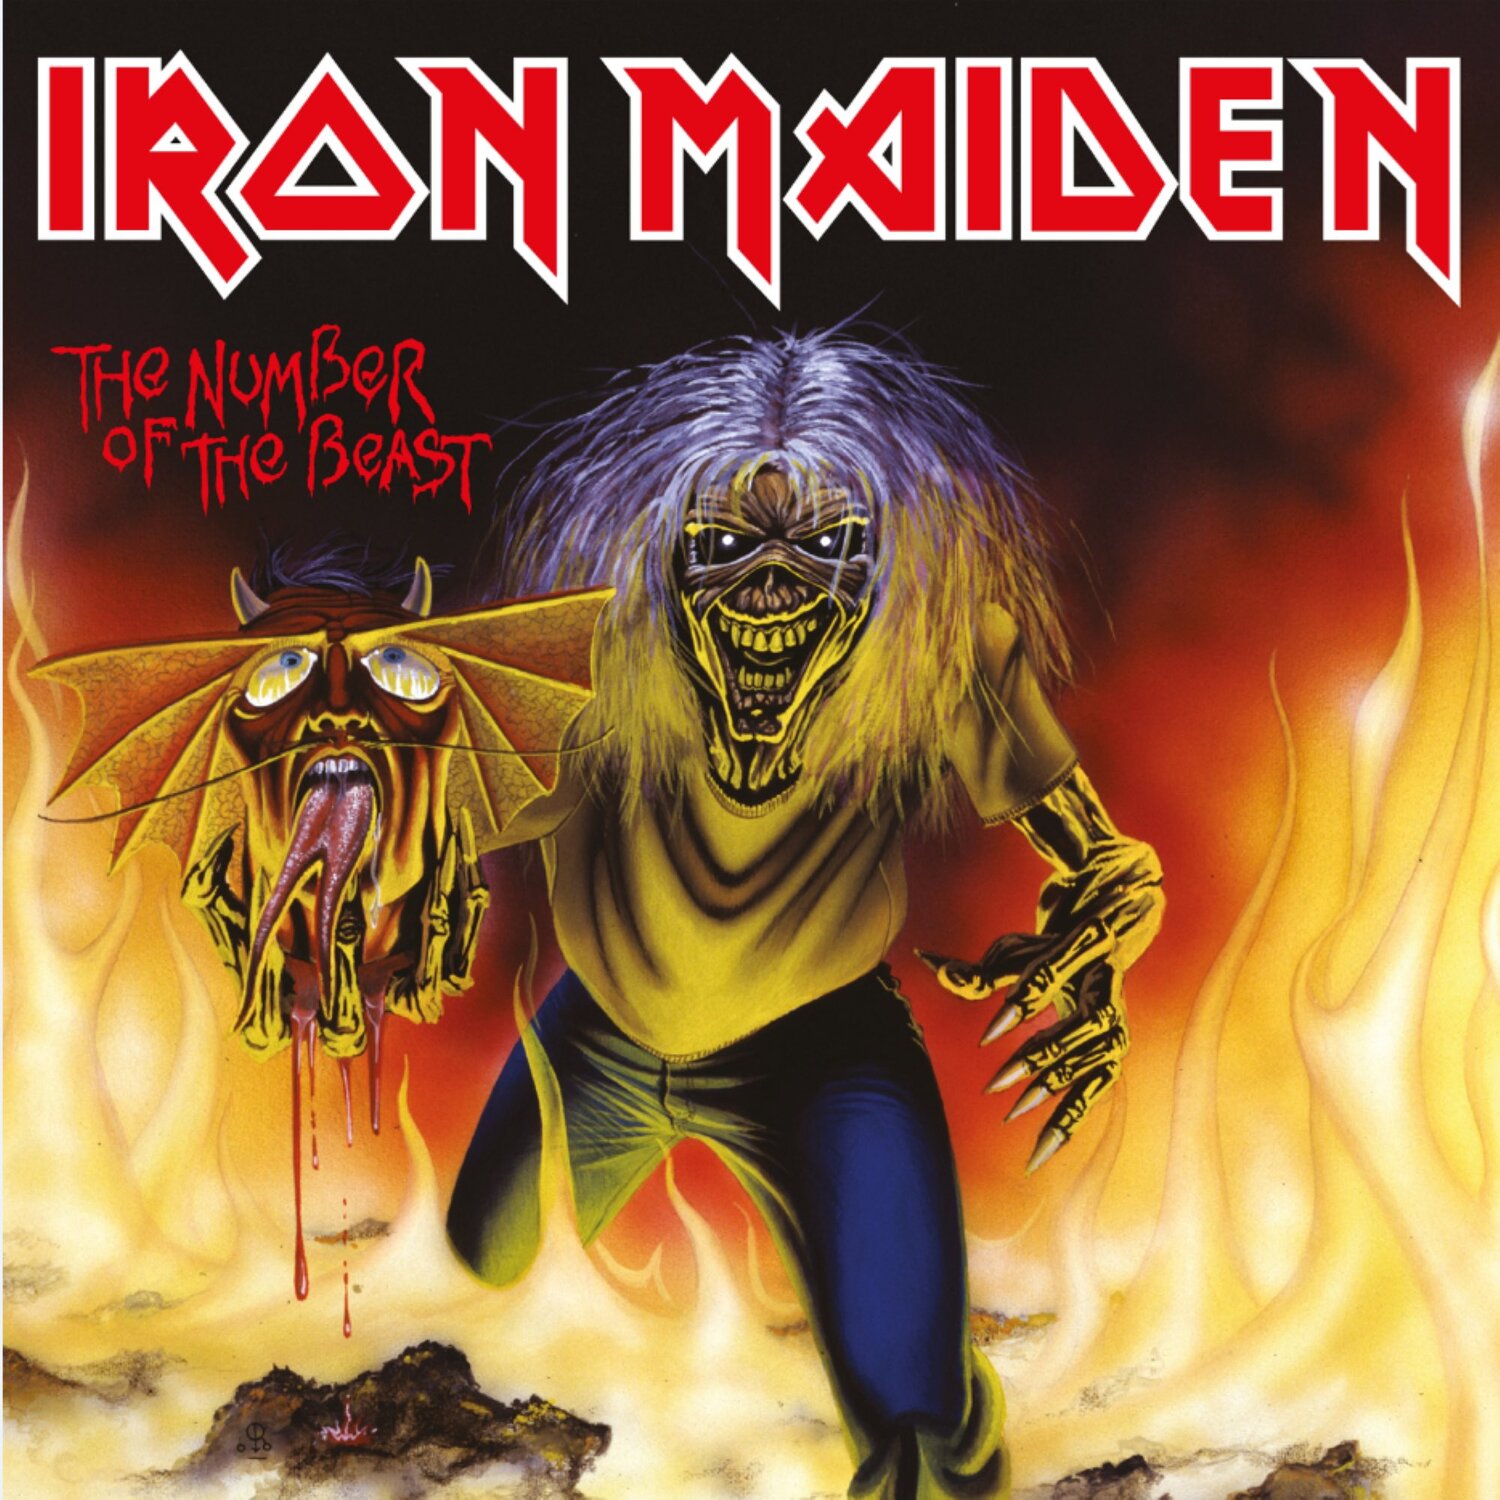 Iron Maiden The Number of the Beast cover artwork